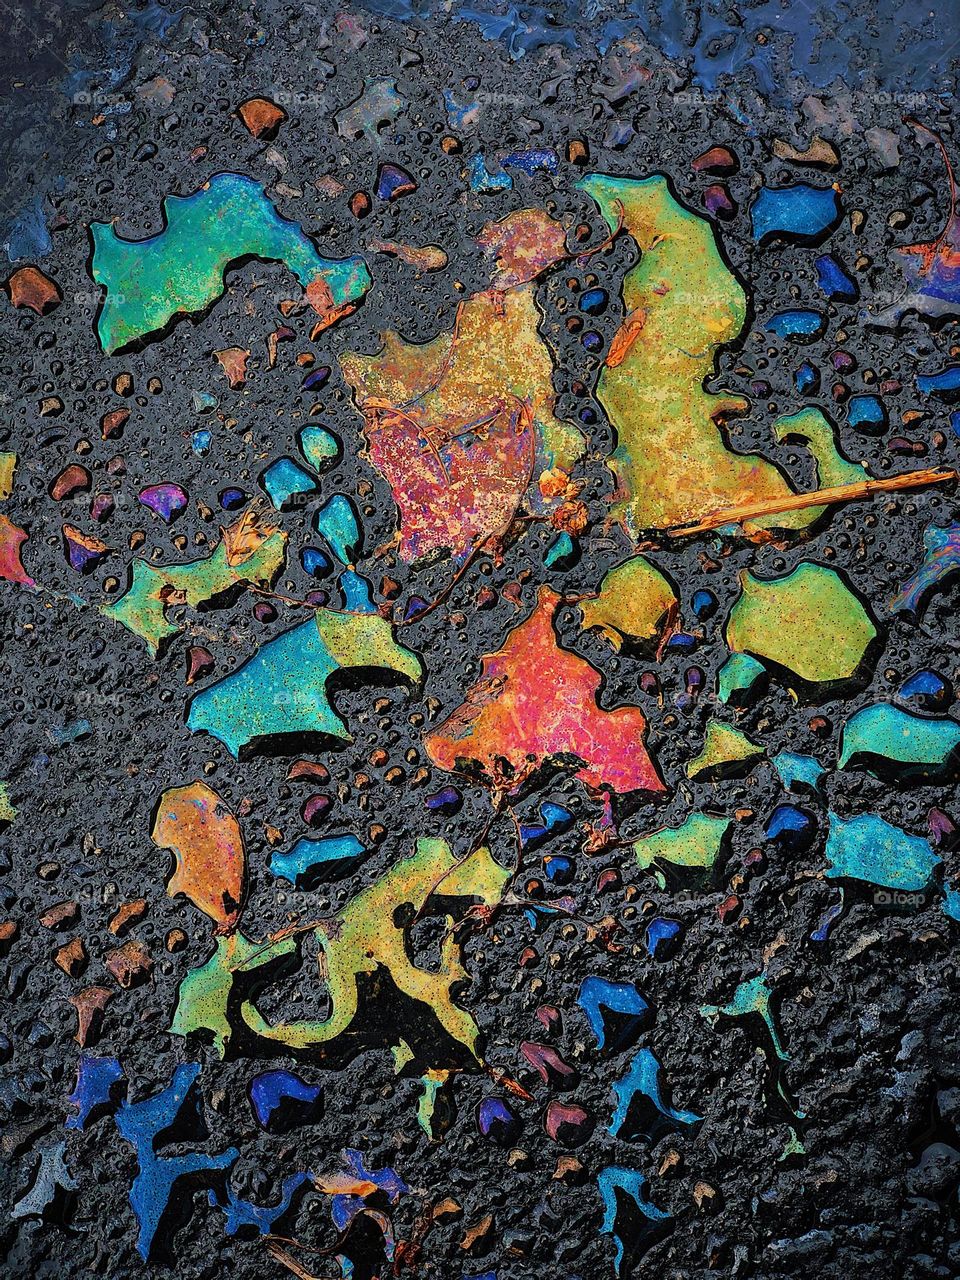 Oil on the pavement, parking lot pretty, beautiful messes, oil and water, pavement spills, colorful messes 